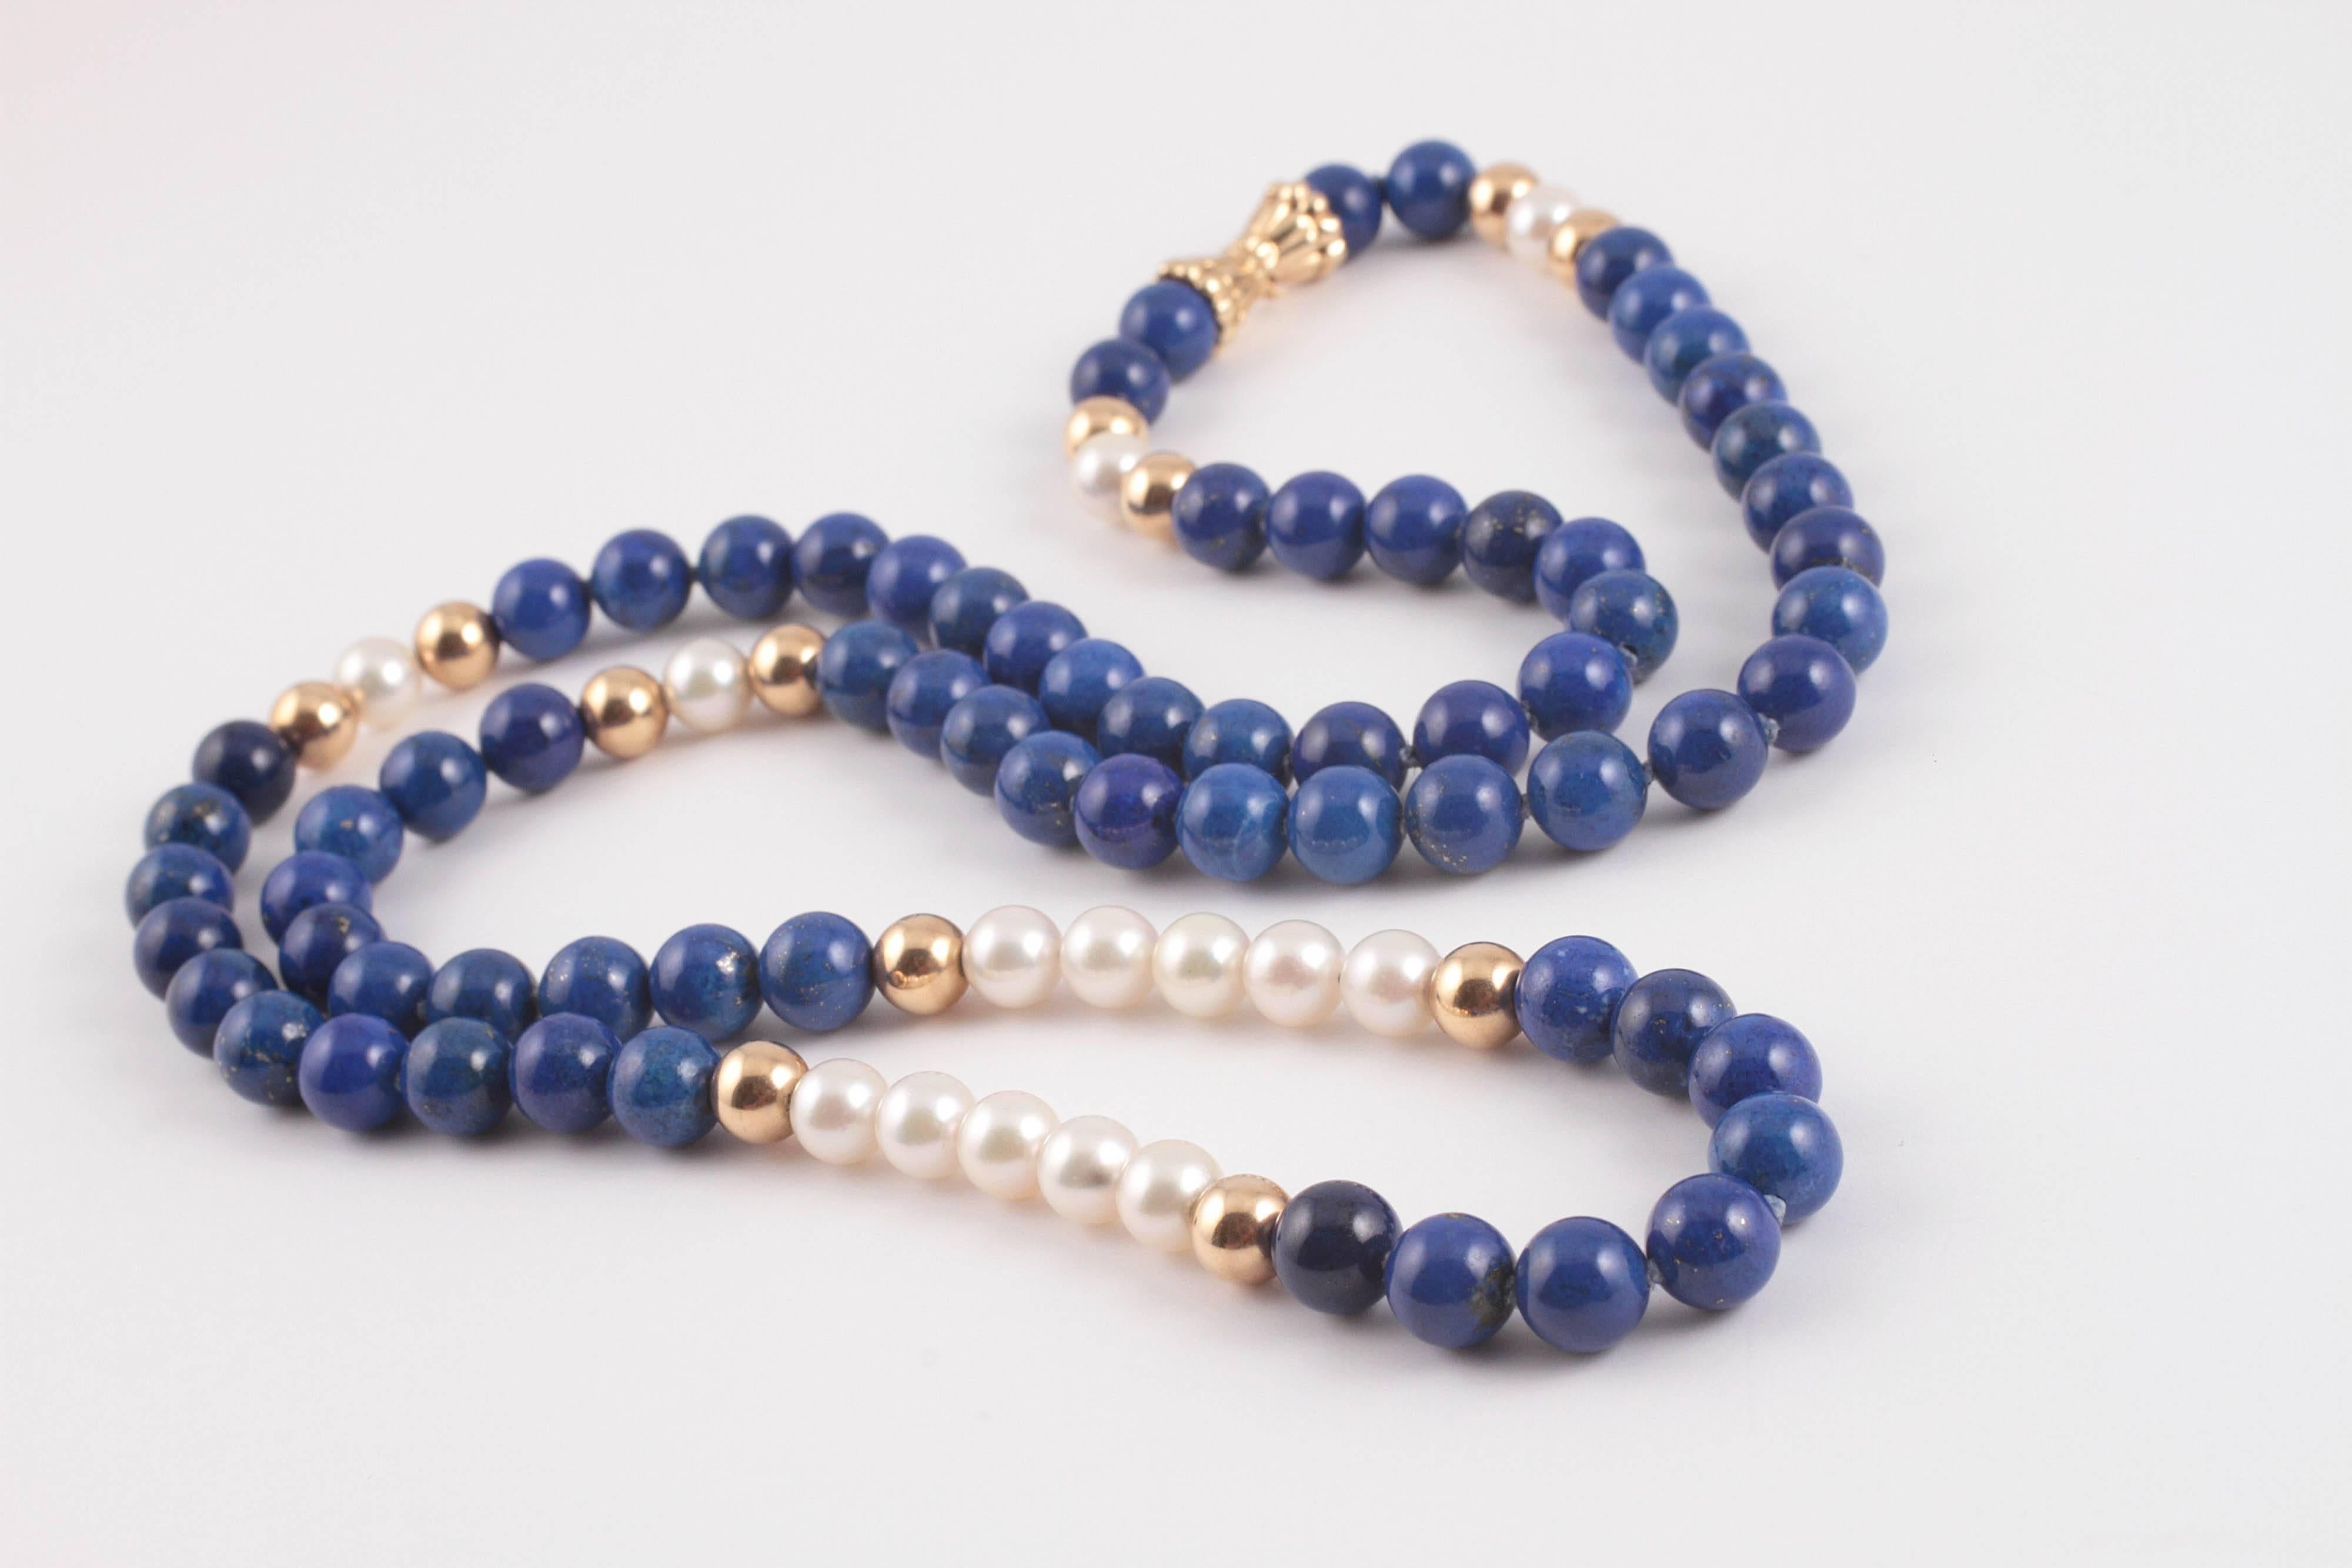 14K yellow gold and lapis lazuli beads with pearls. This lovely strand measures 31